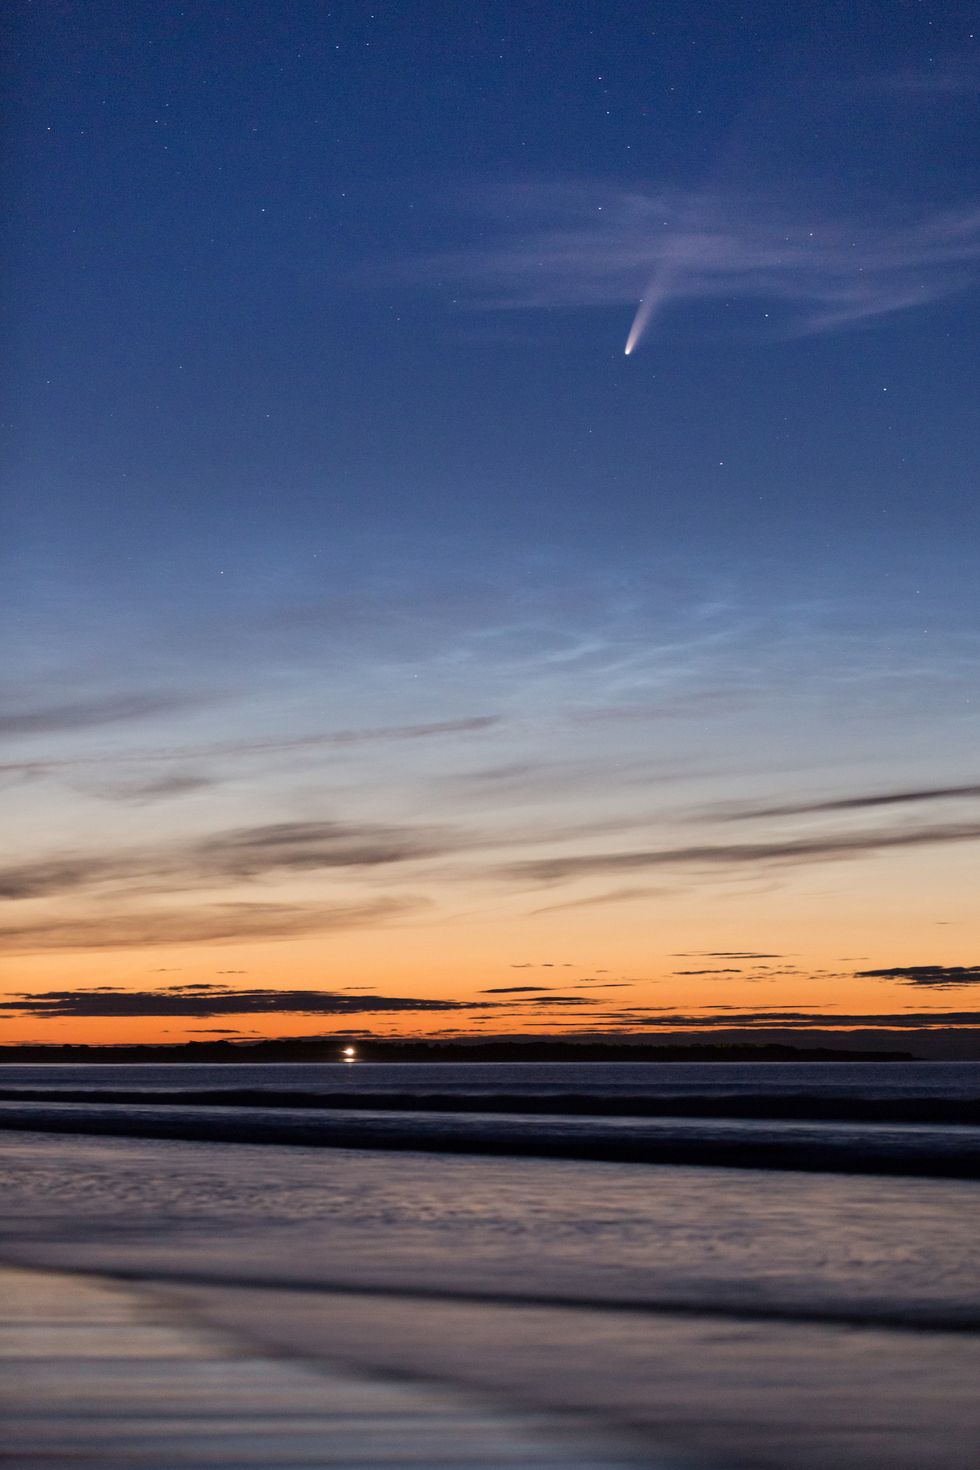 noctilucent clouds spotted on the beach at druridge bay on the northumberland coast, north east england